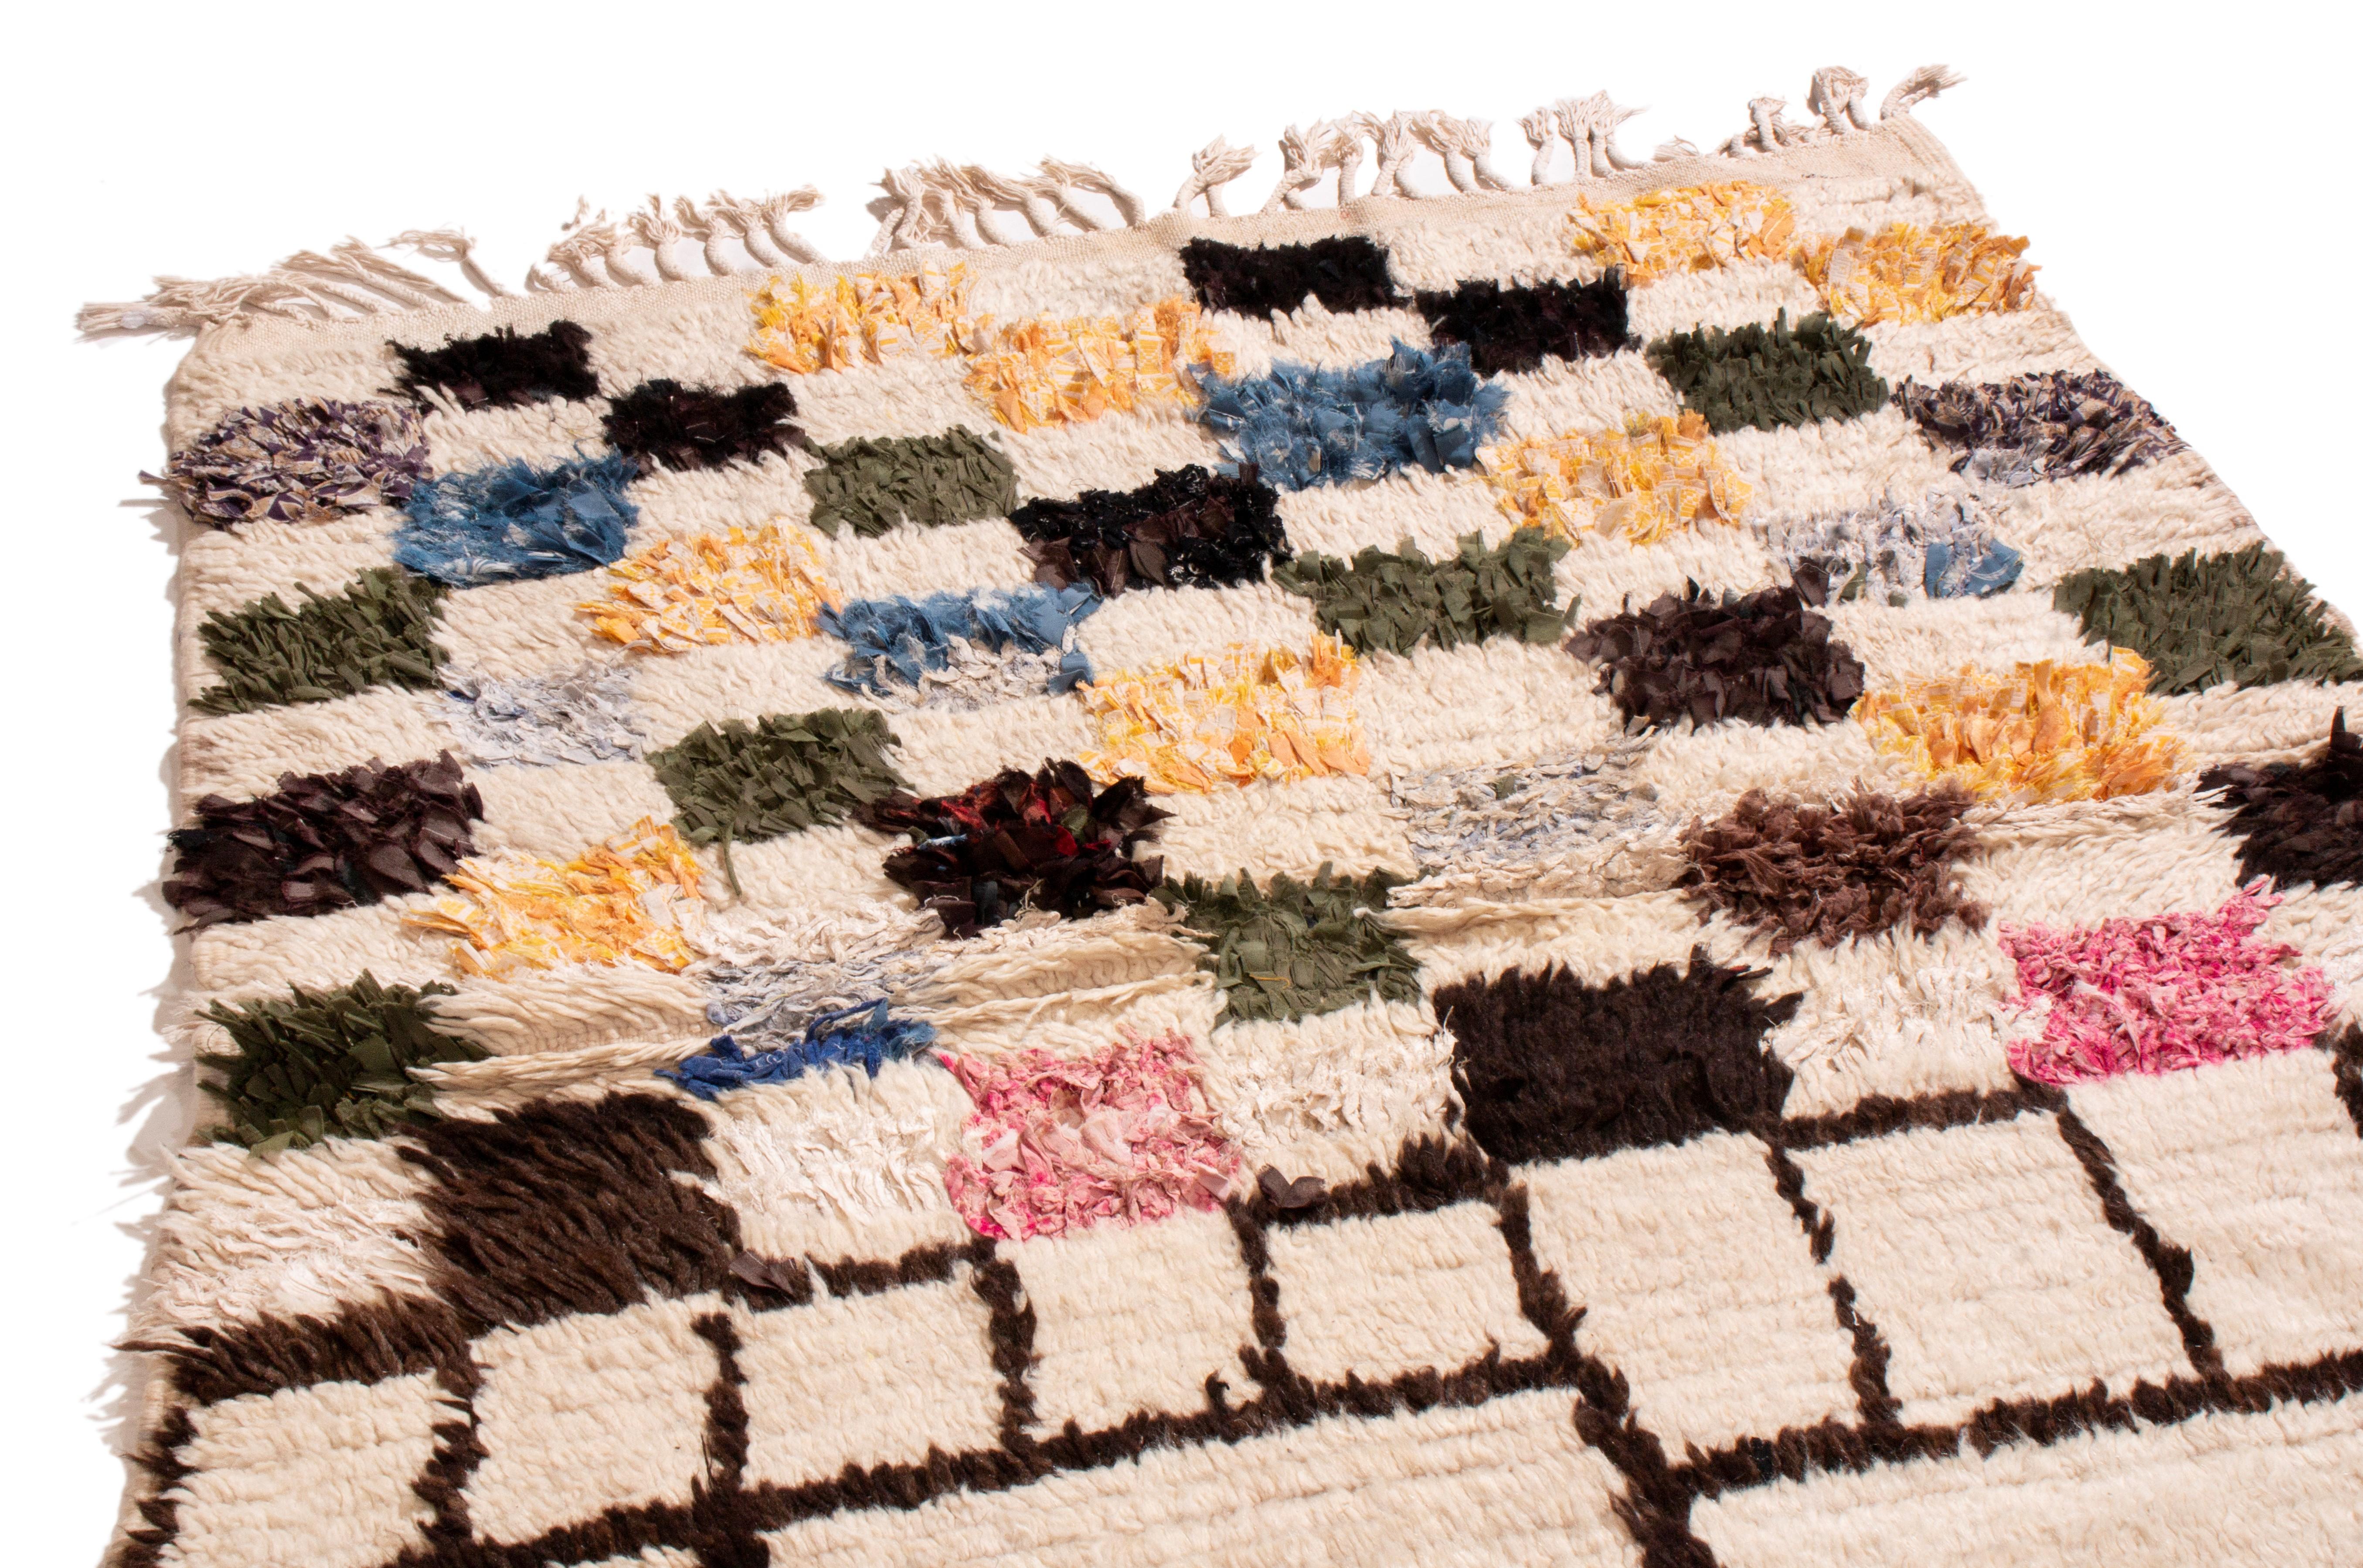 Originating from Morocco in the 1950s, this vintage mid-century Moroccan Berber rug is hand knotted in high quality wool with a rare employment of symmetrical fringes and sharp geometrics. While many Berber pieces of this era favor wilder colors